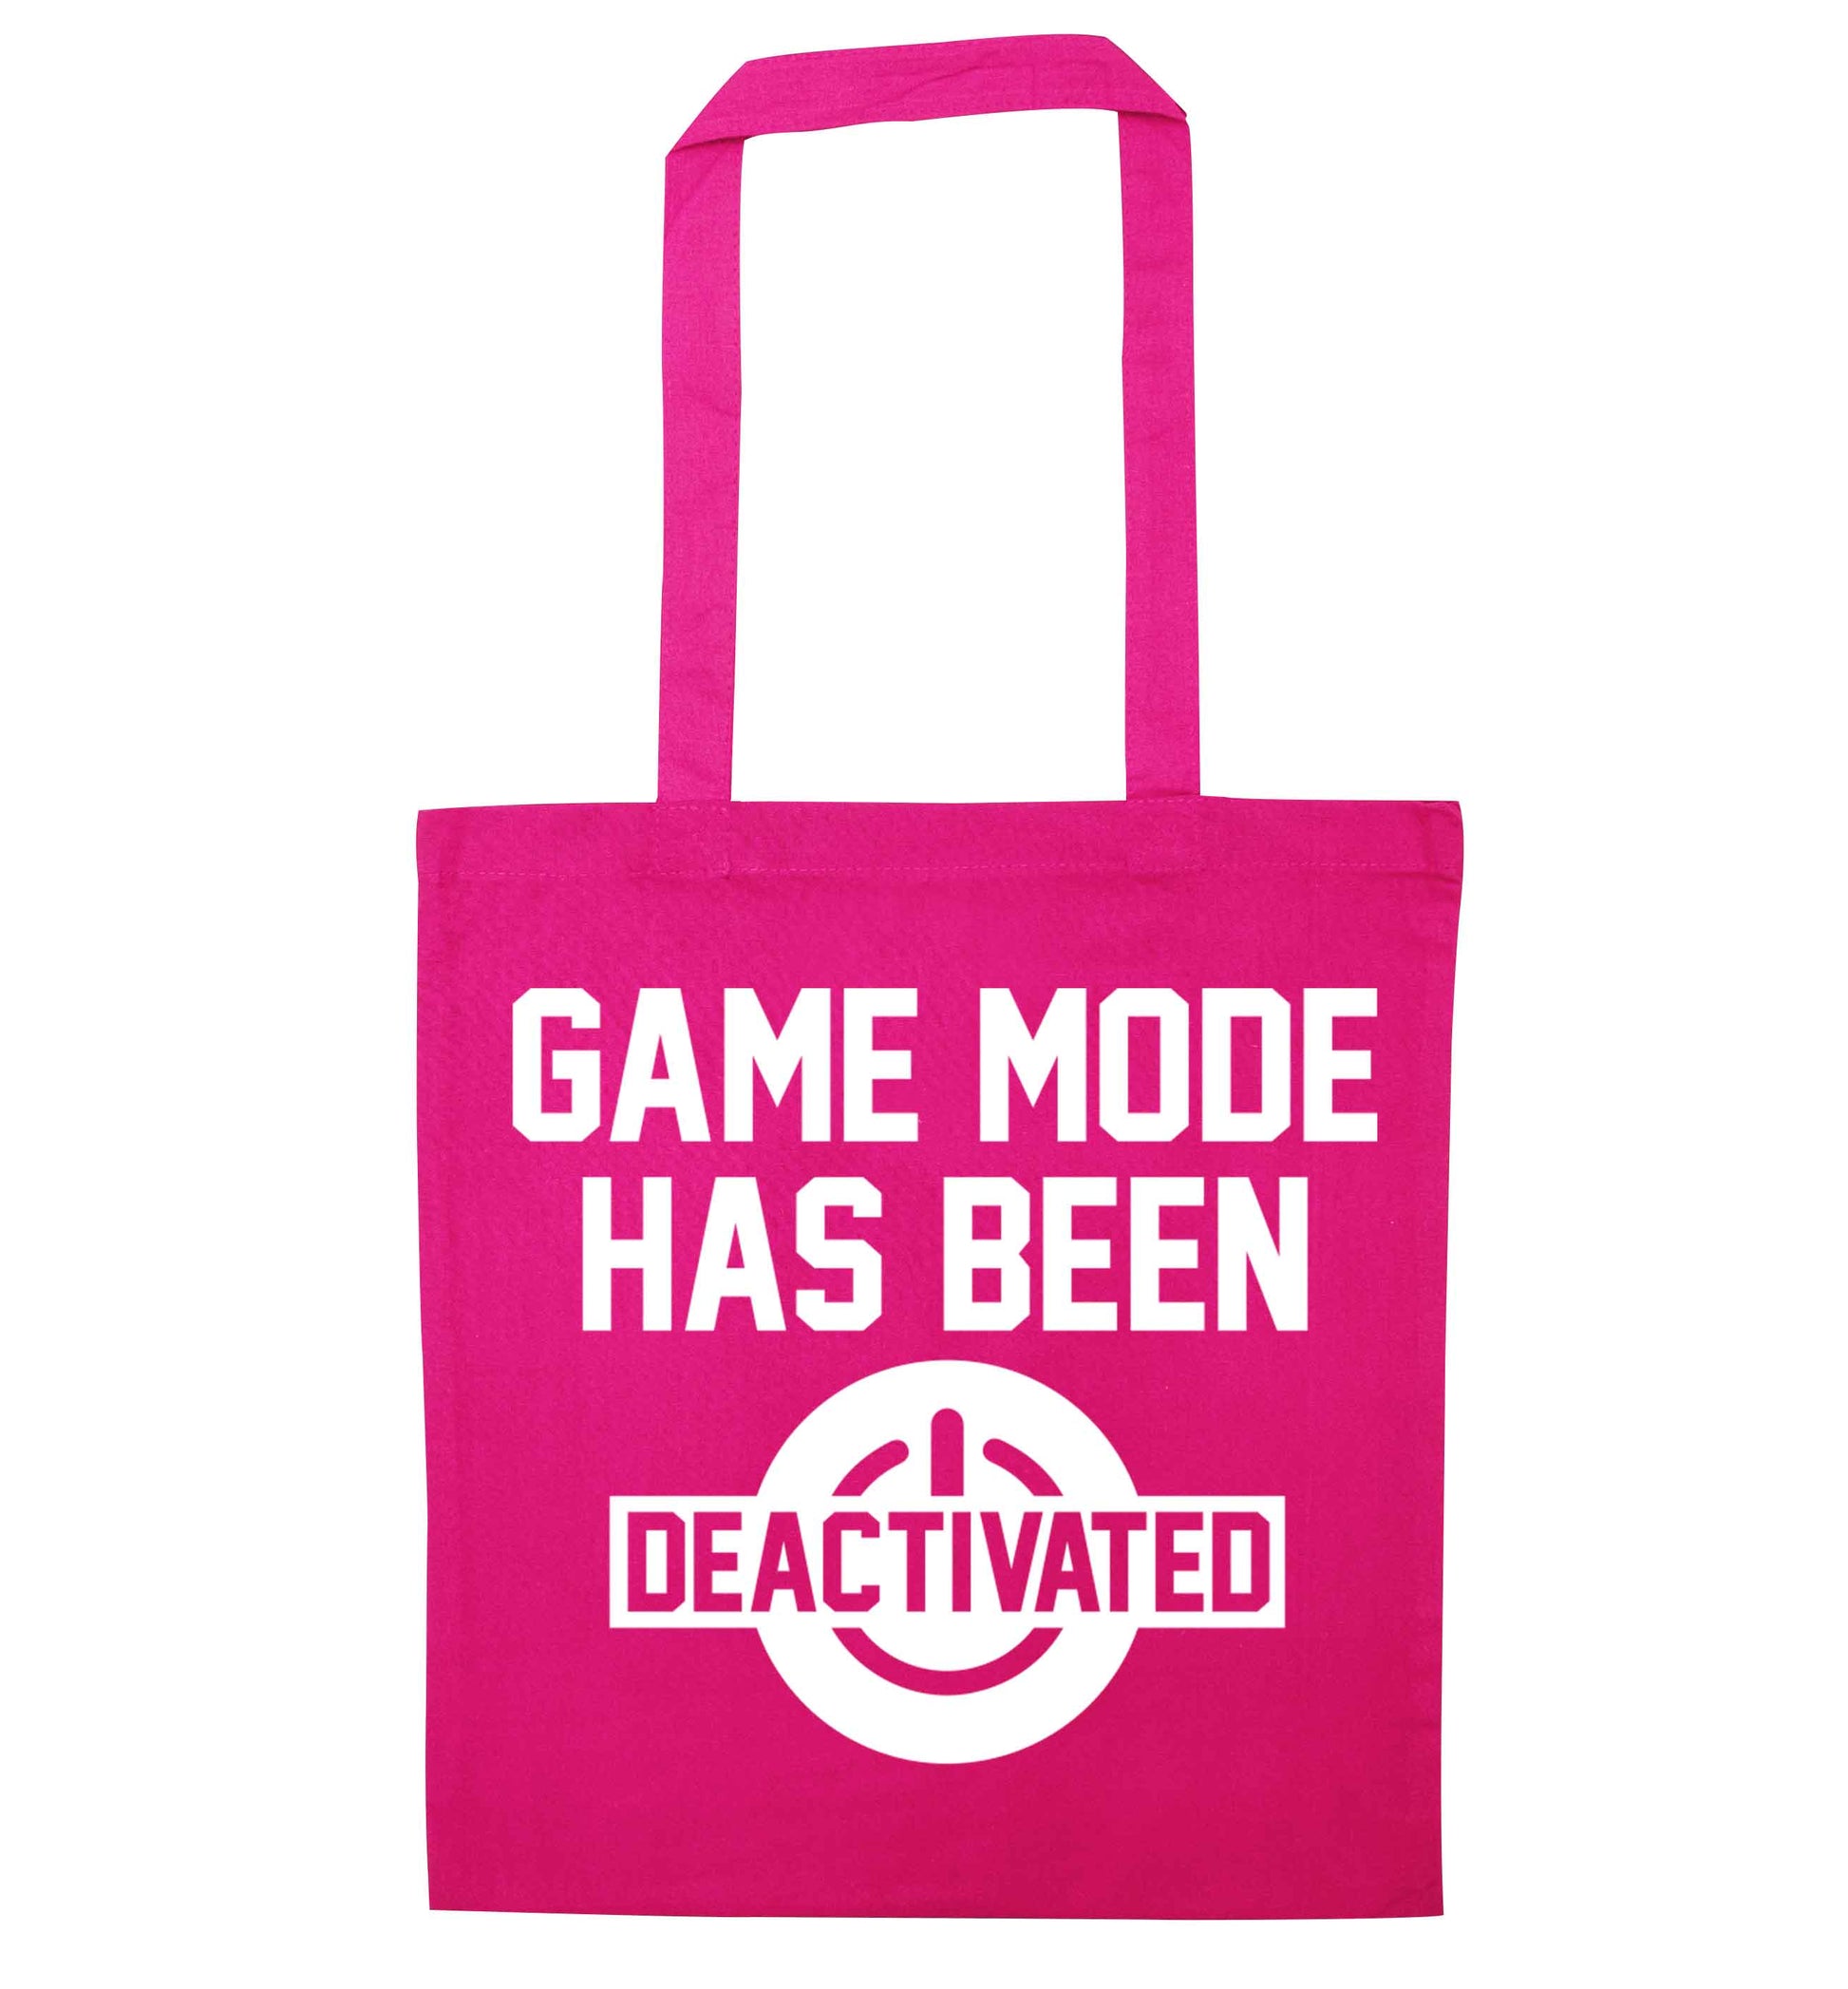 Game Mode Has Been Deactivated pink tote bag